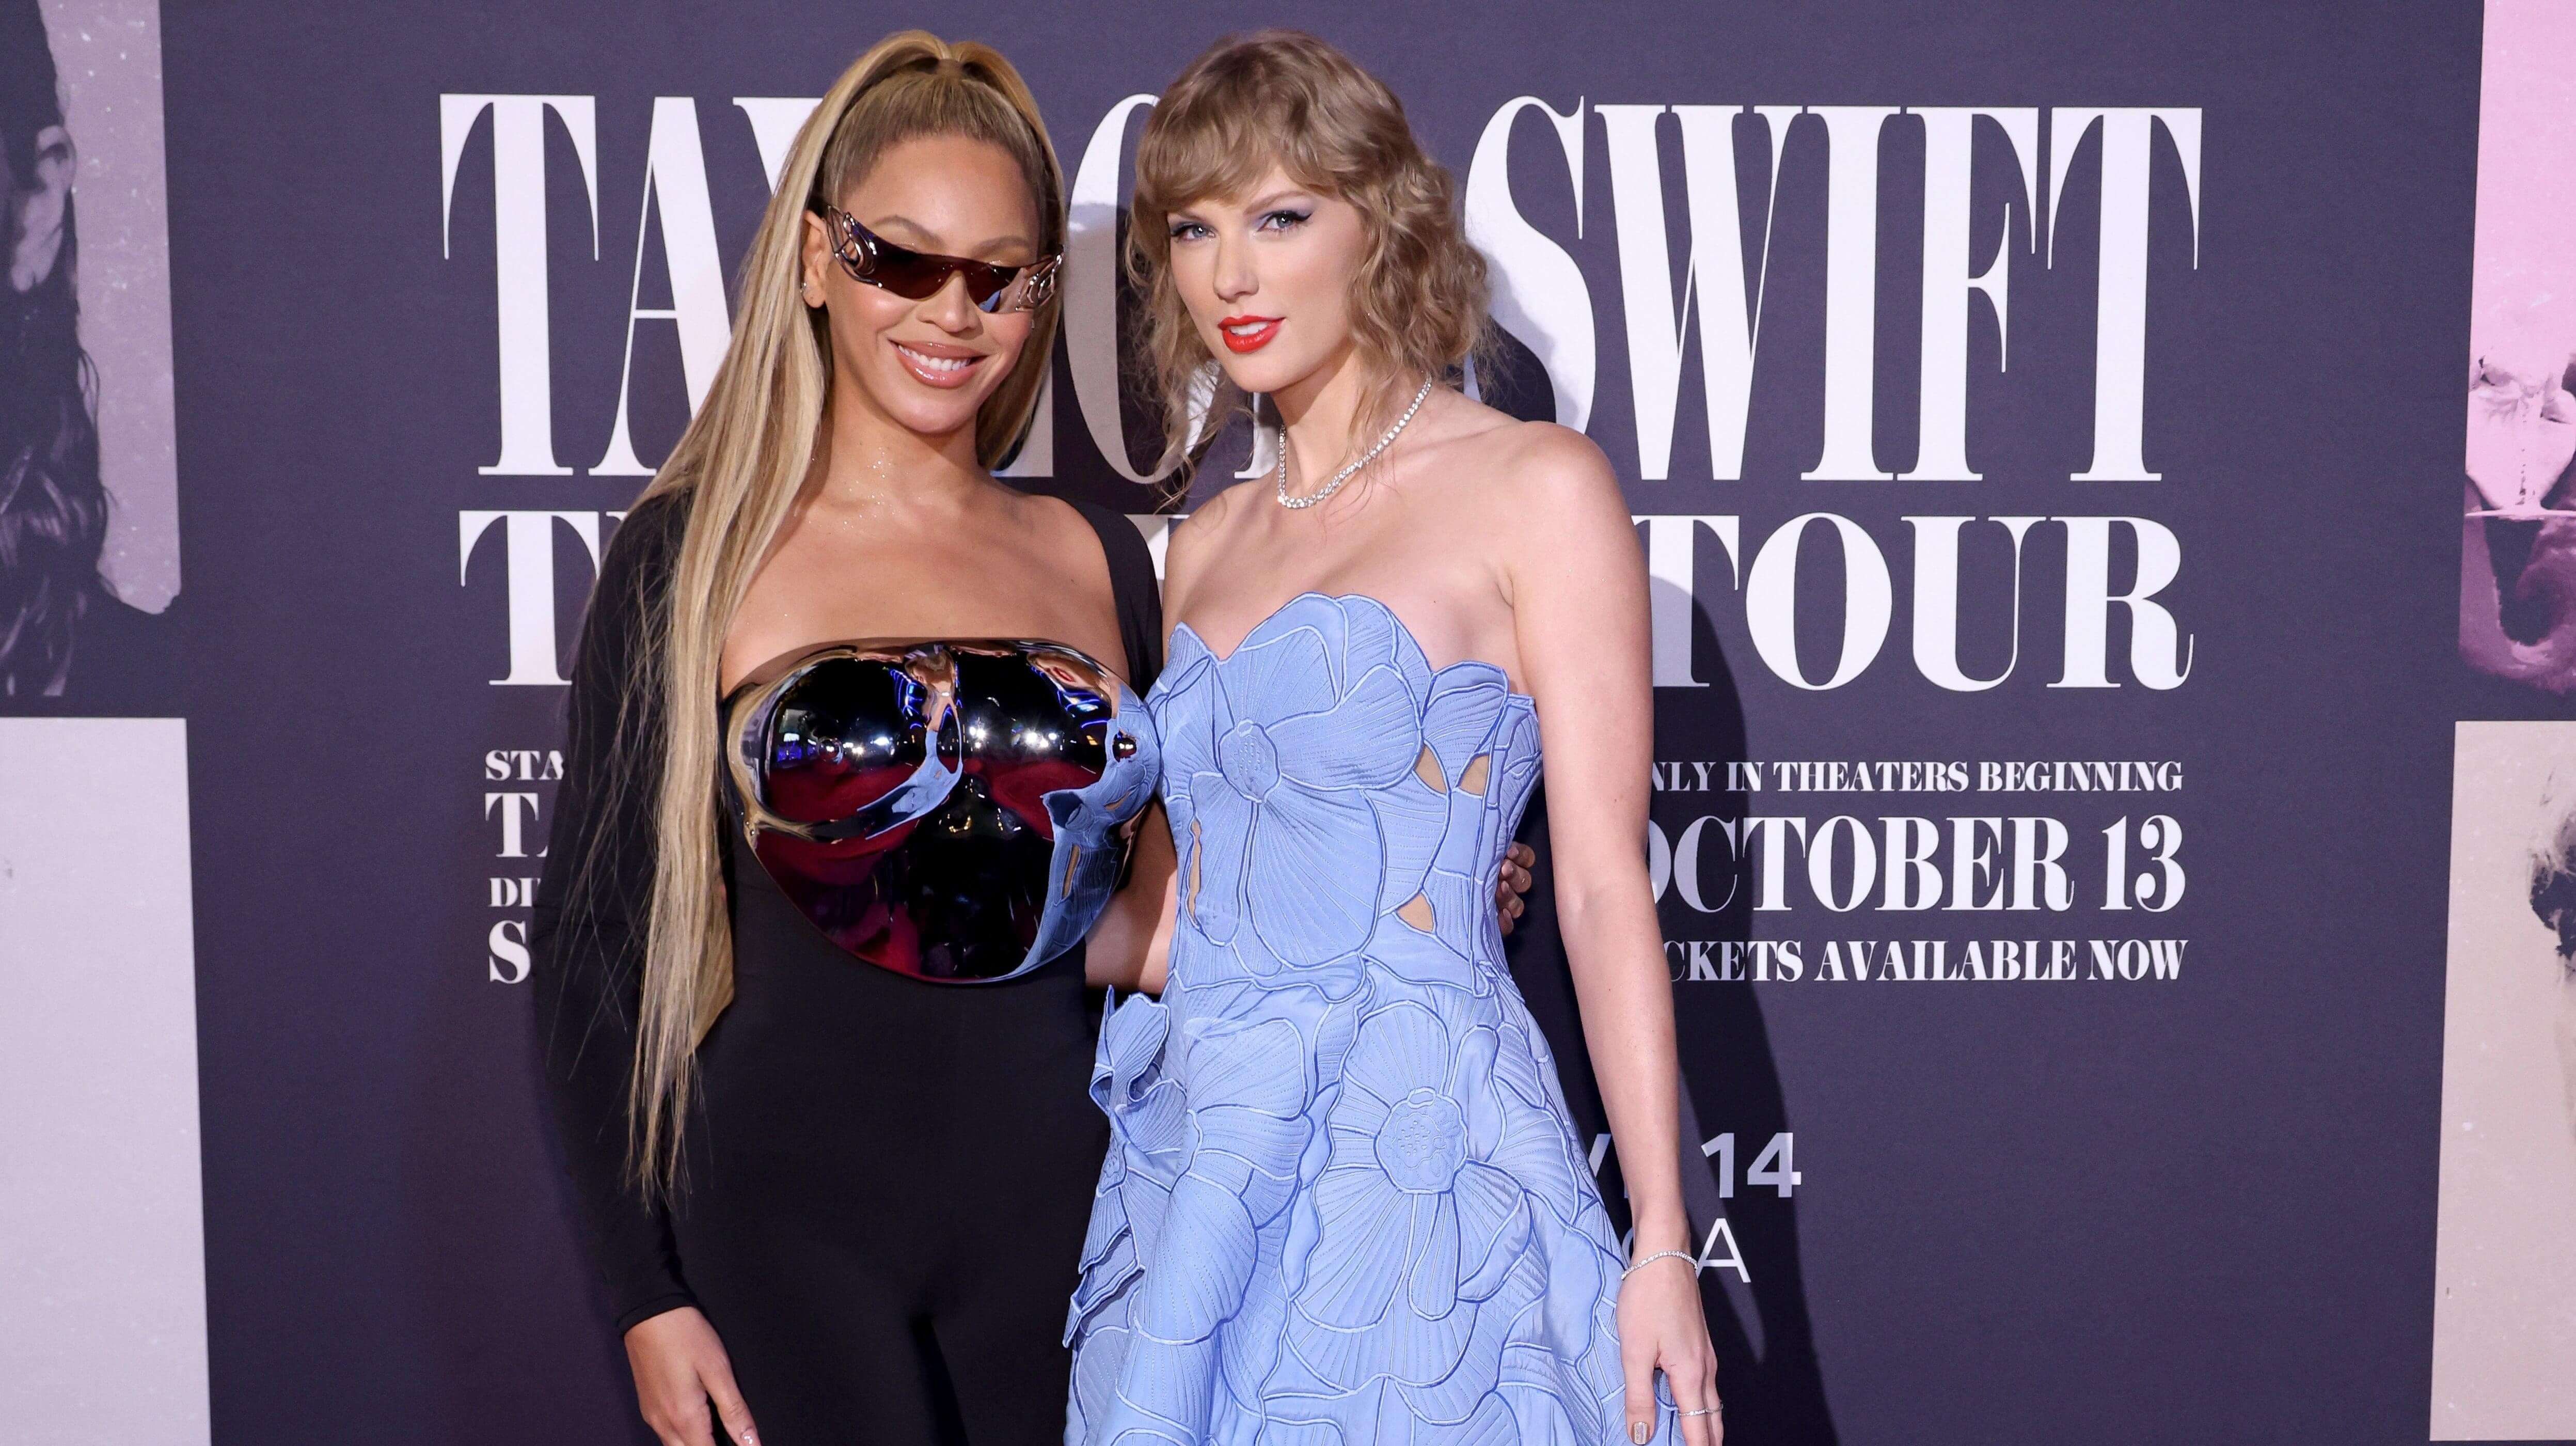 The Taylor Swift and Beyoncé concerts helped AMC theaters a whole lot